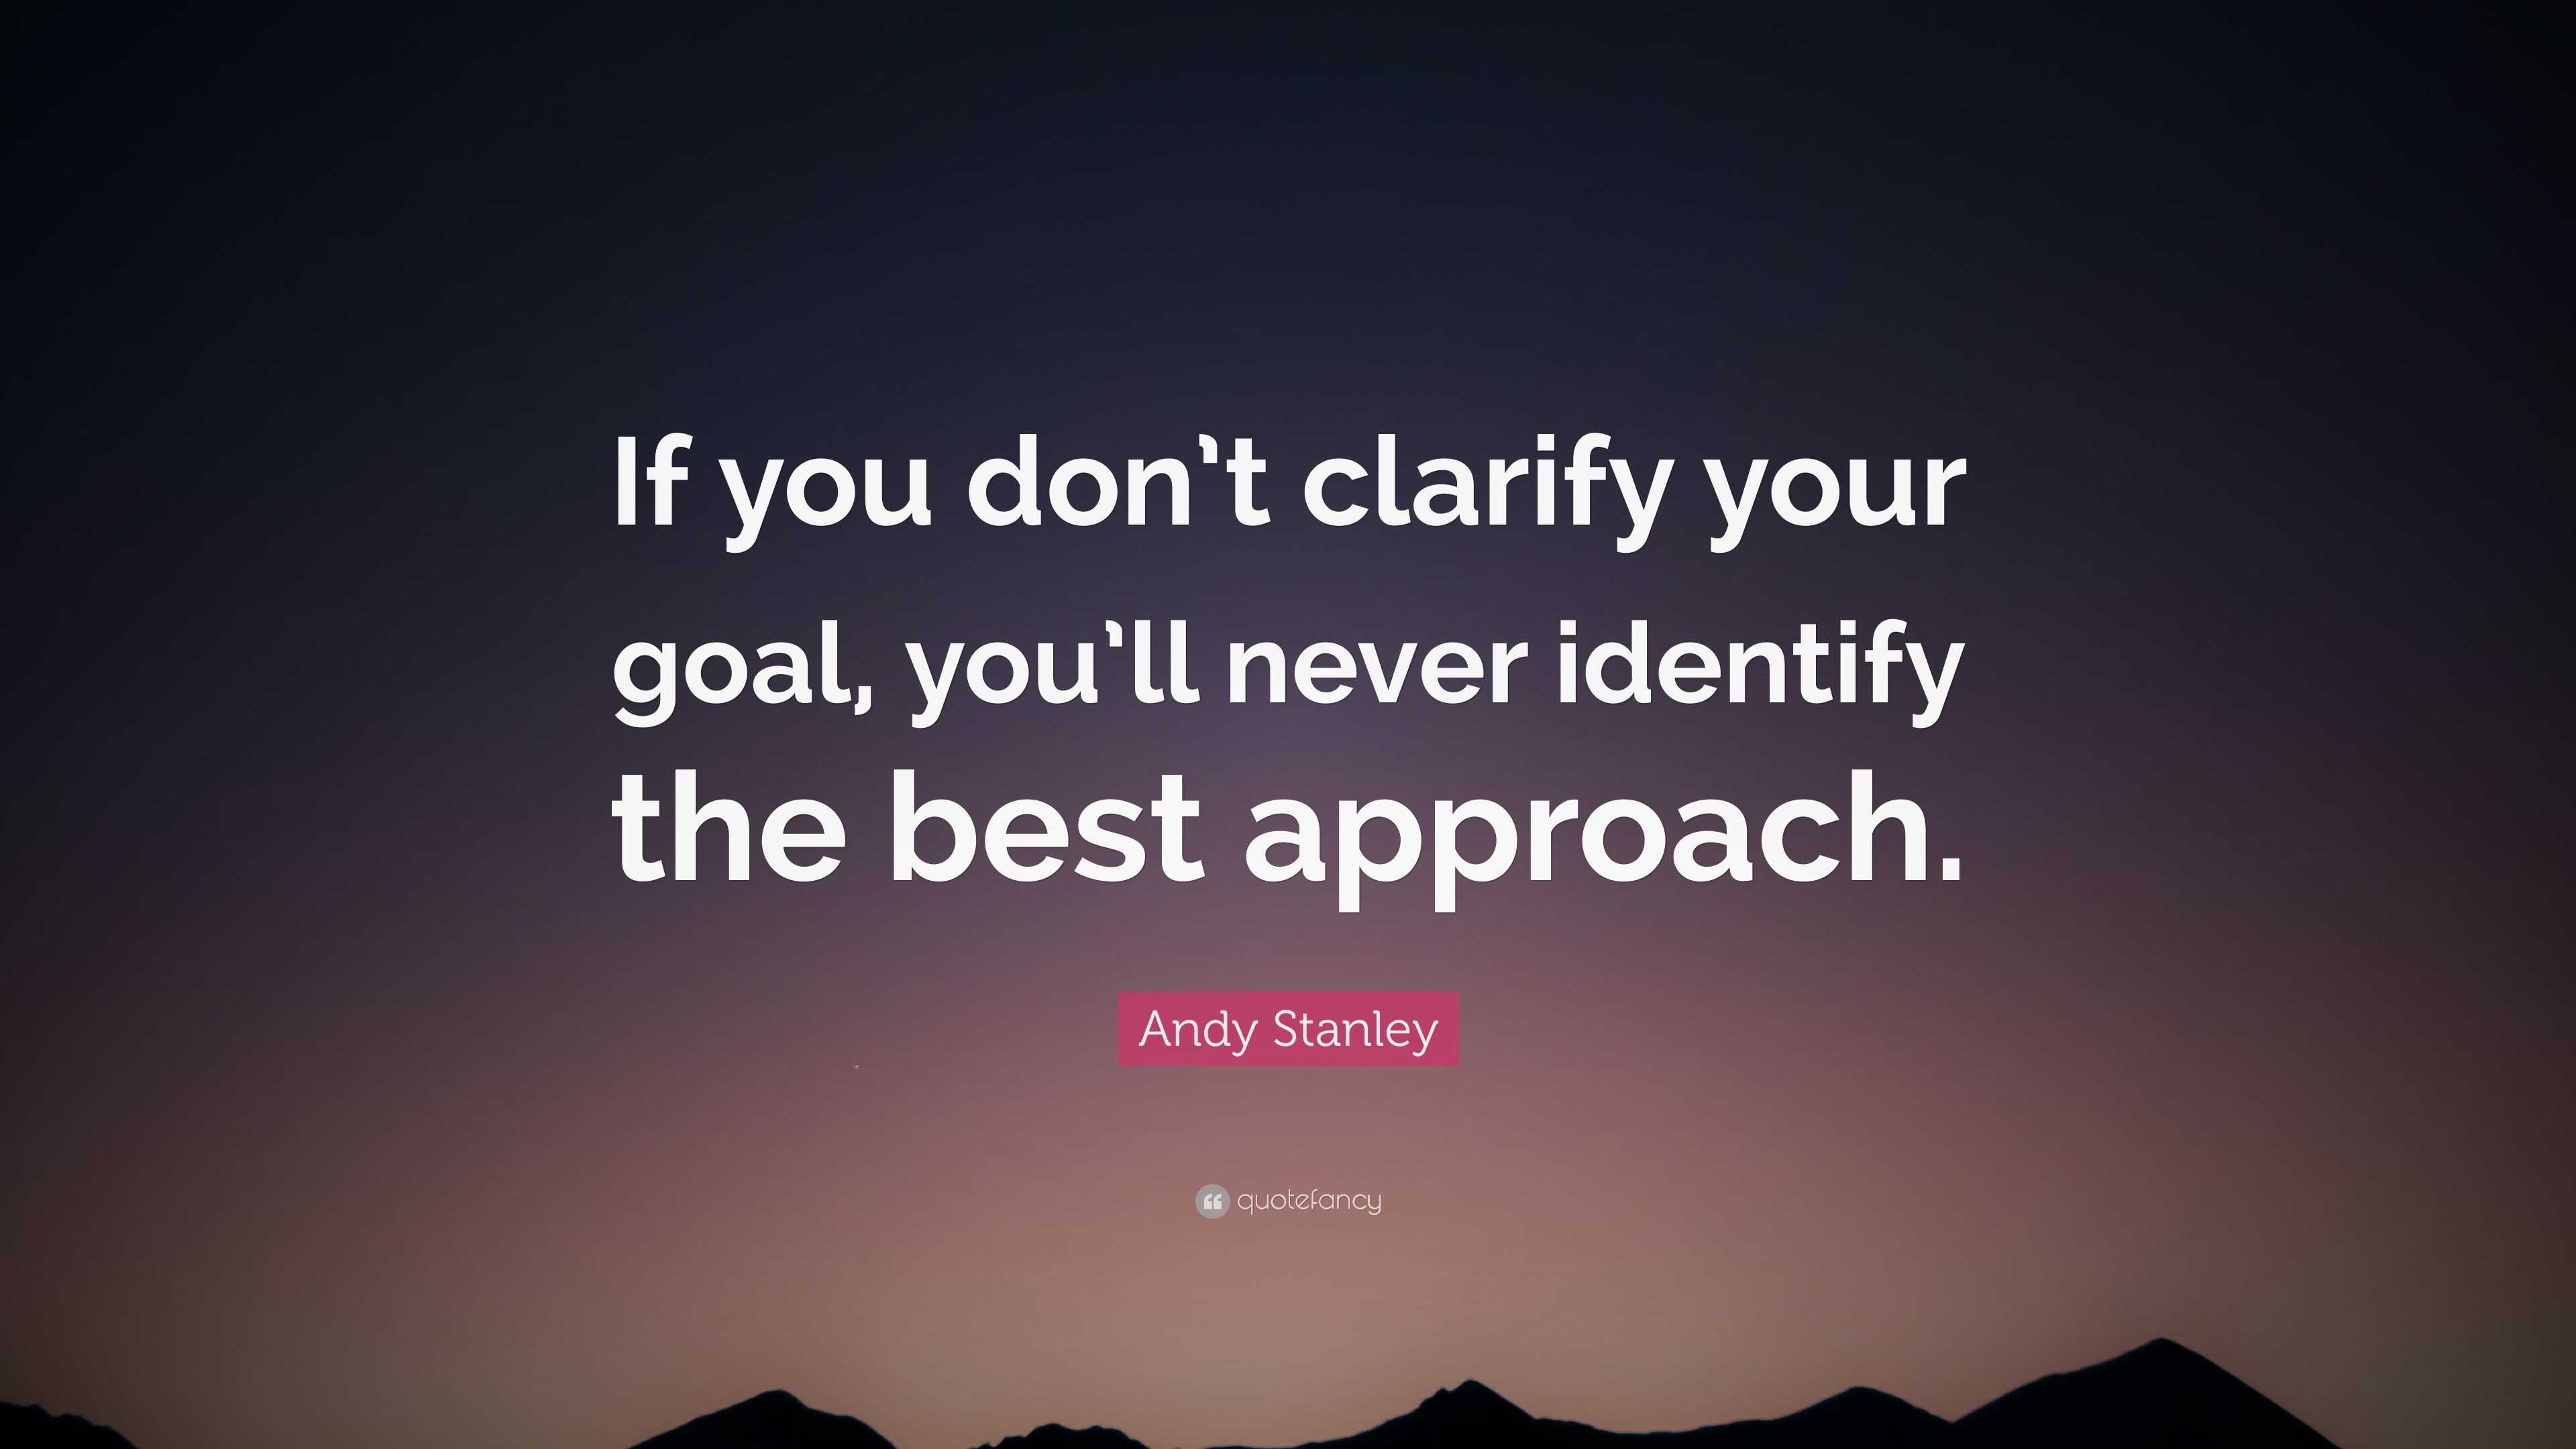 https://quotefancy.com/media/wallpaper/3840x2160/4314301-Andy-Stanley-Quote-If-you-don-t-clarify-your-goal-you-ll-never.jpg